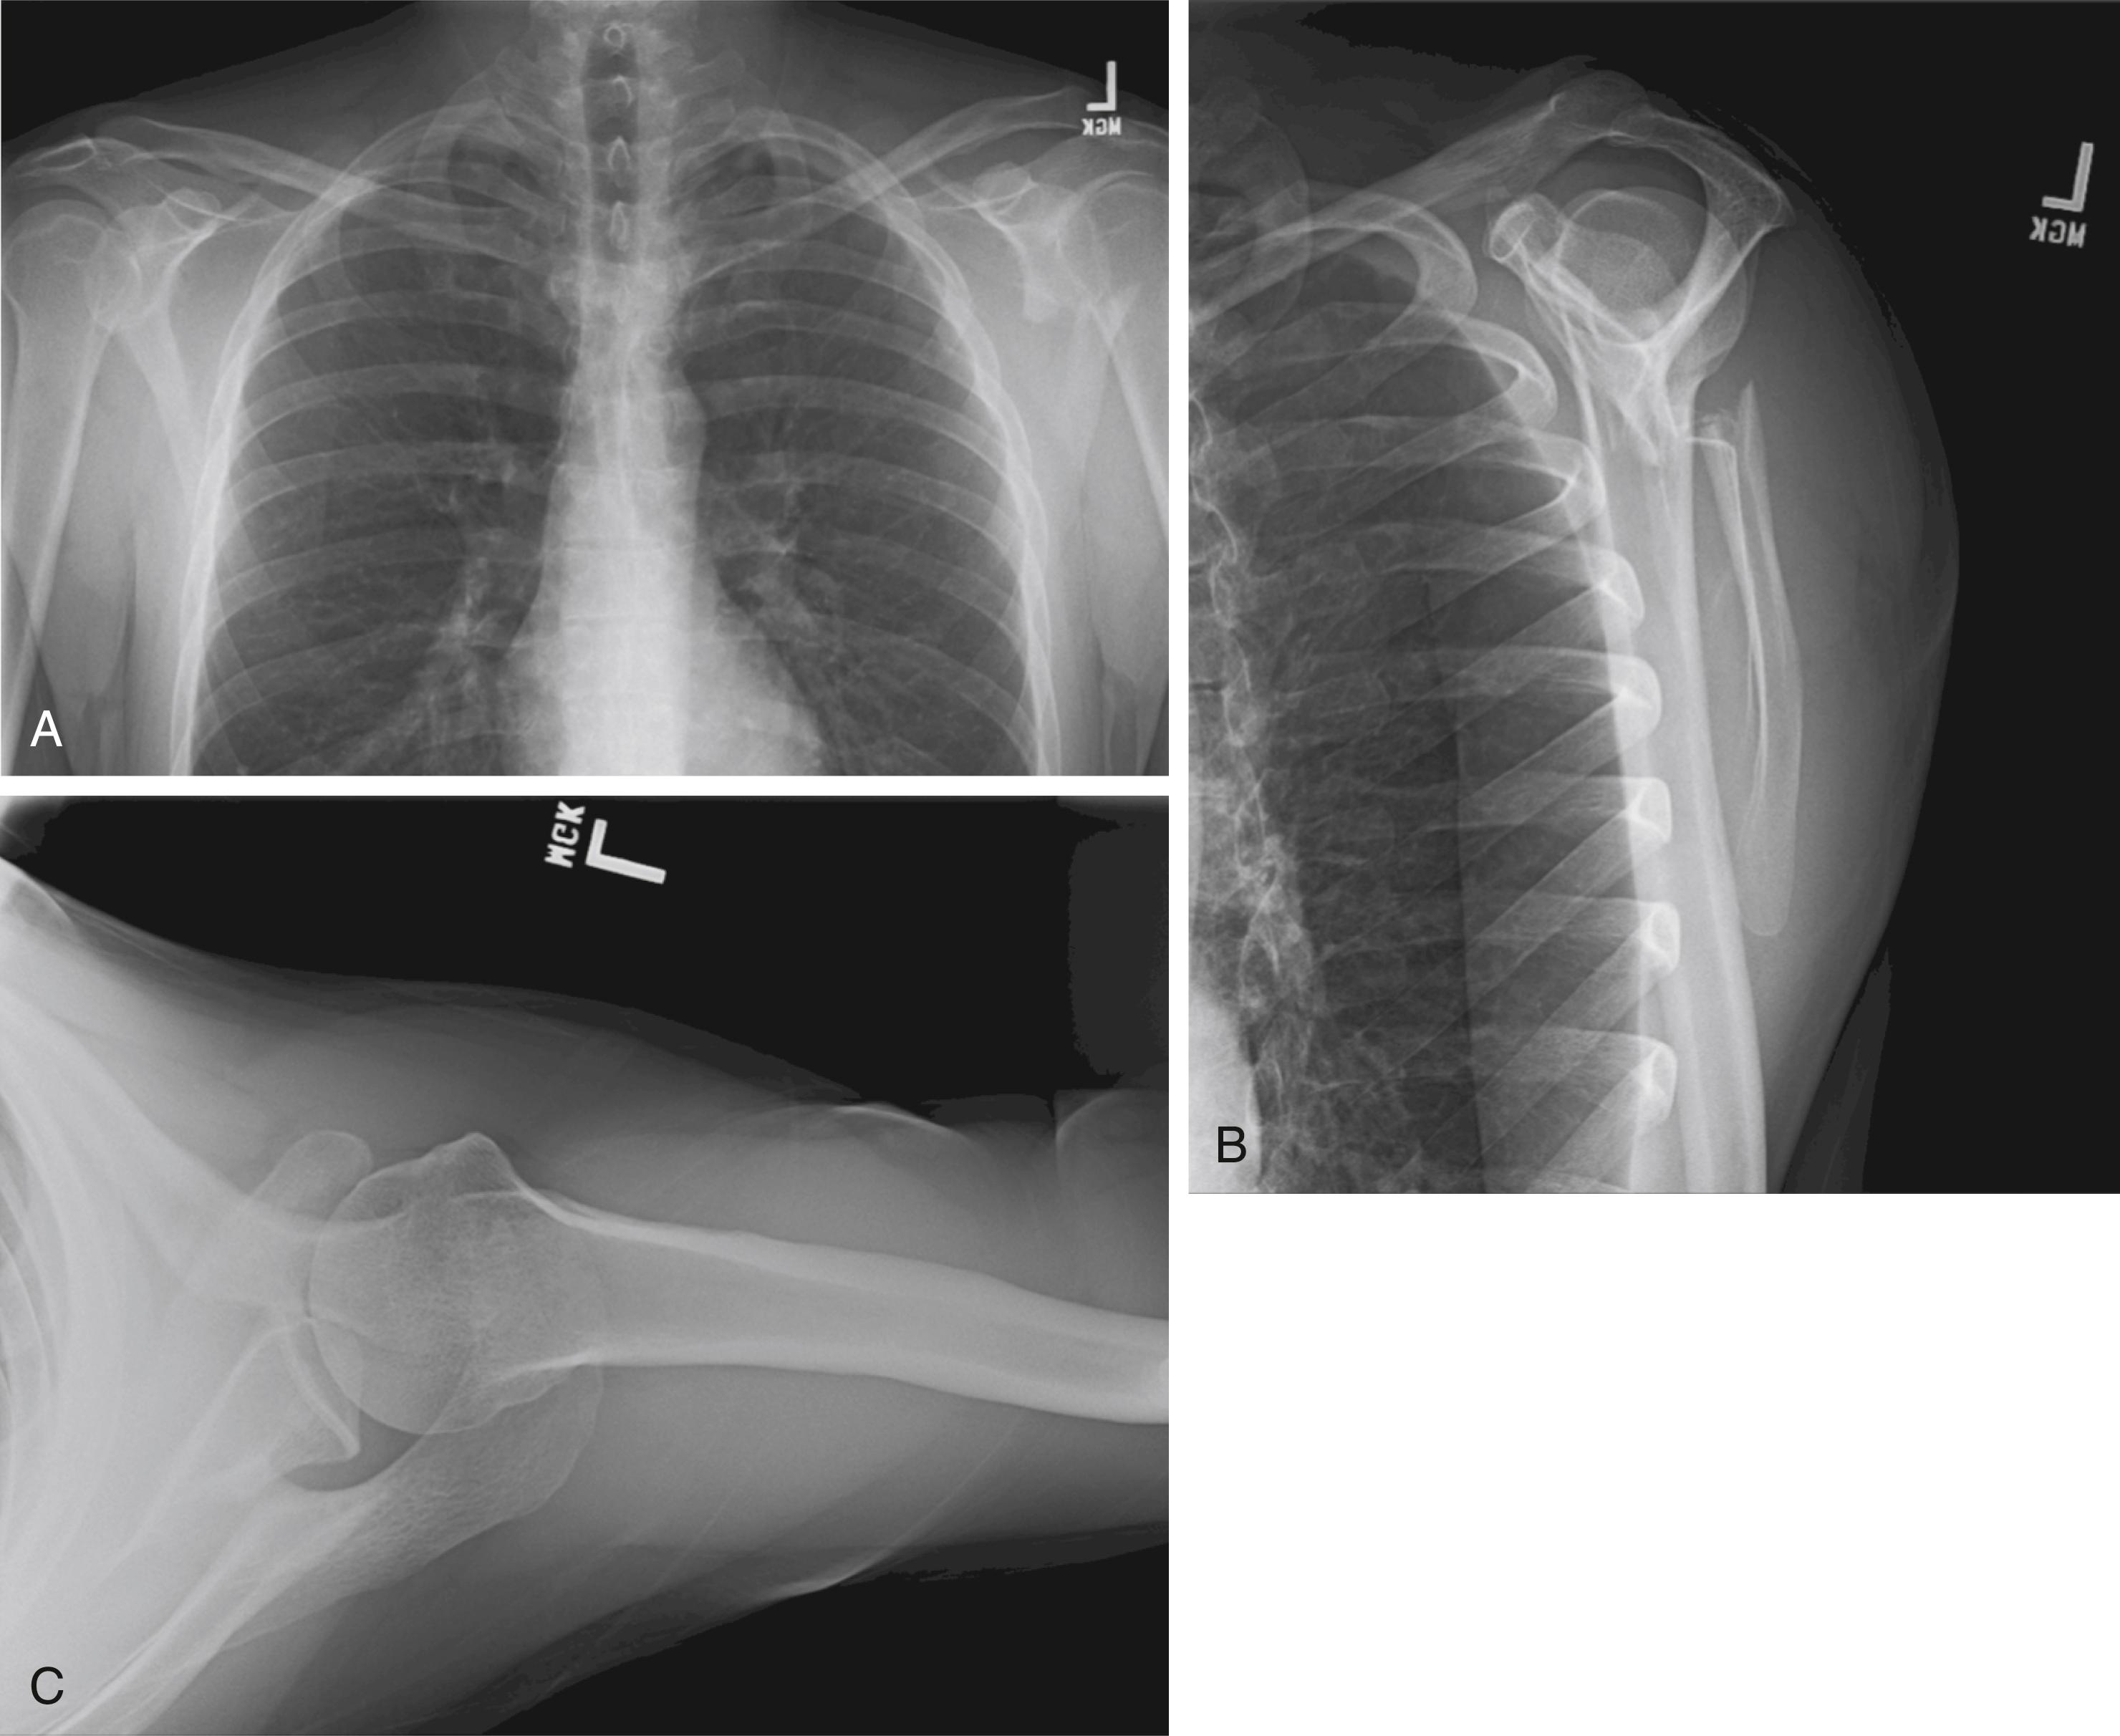 Fig. 15.8, Injury radiographs of an extra-articular left scapula fracture. (A) Anteroposterior view, (B) scapula Y view, and (C) axillary view of the left scapula.